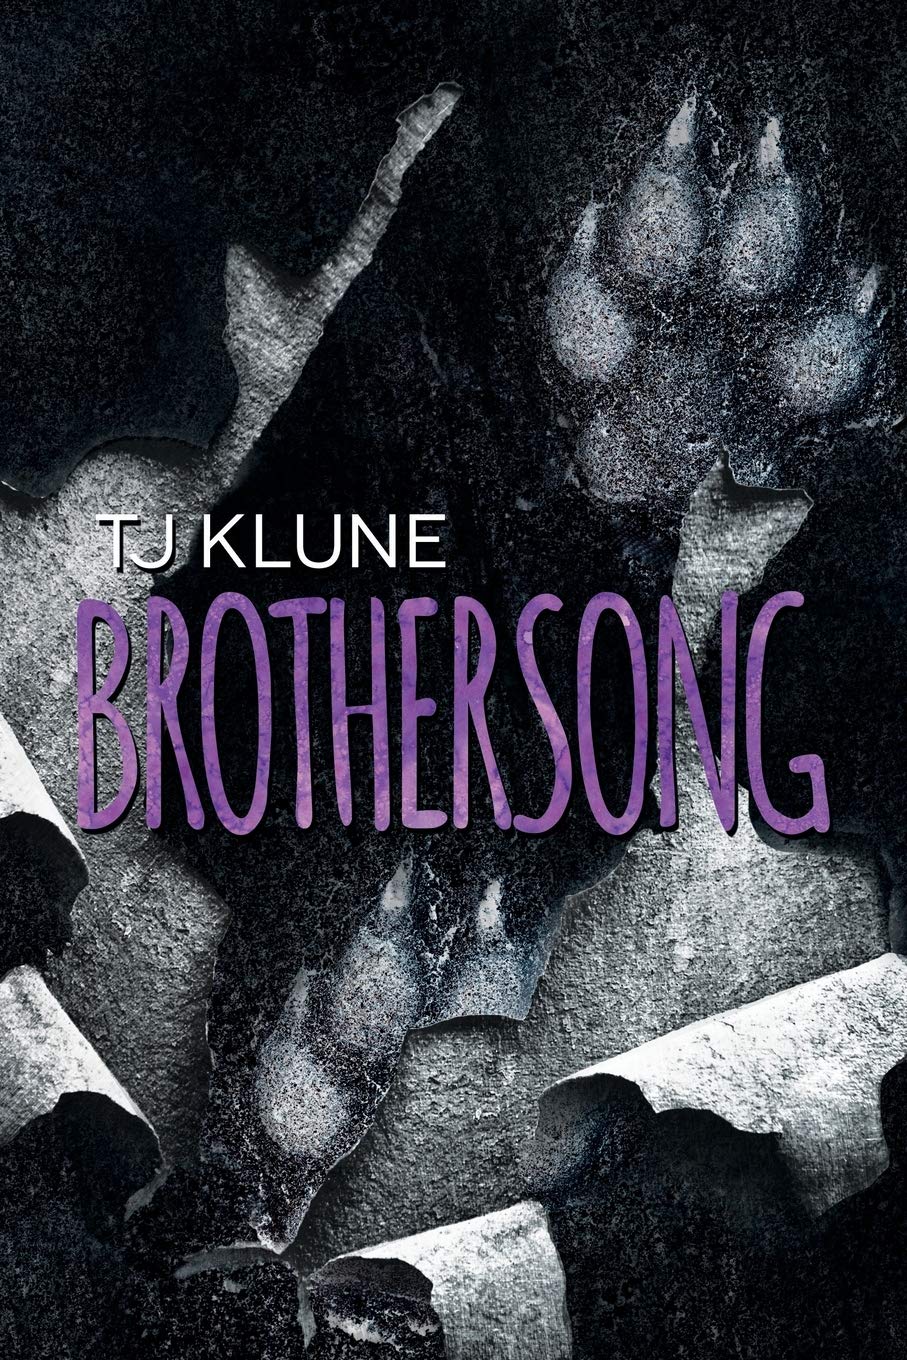 [EPUB] Green Creek #4 Brothersong by T.J. Klune